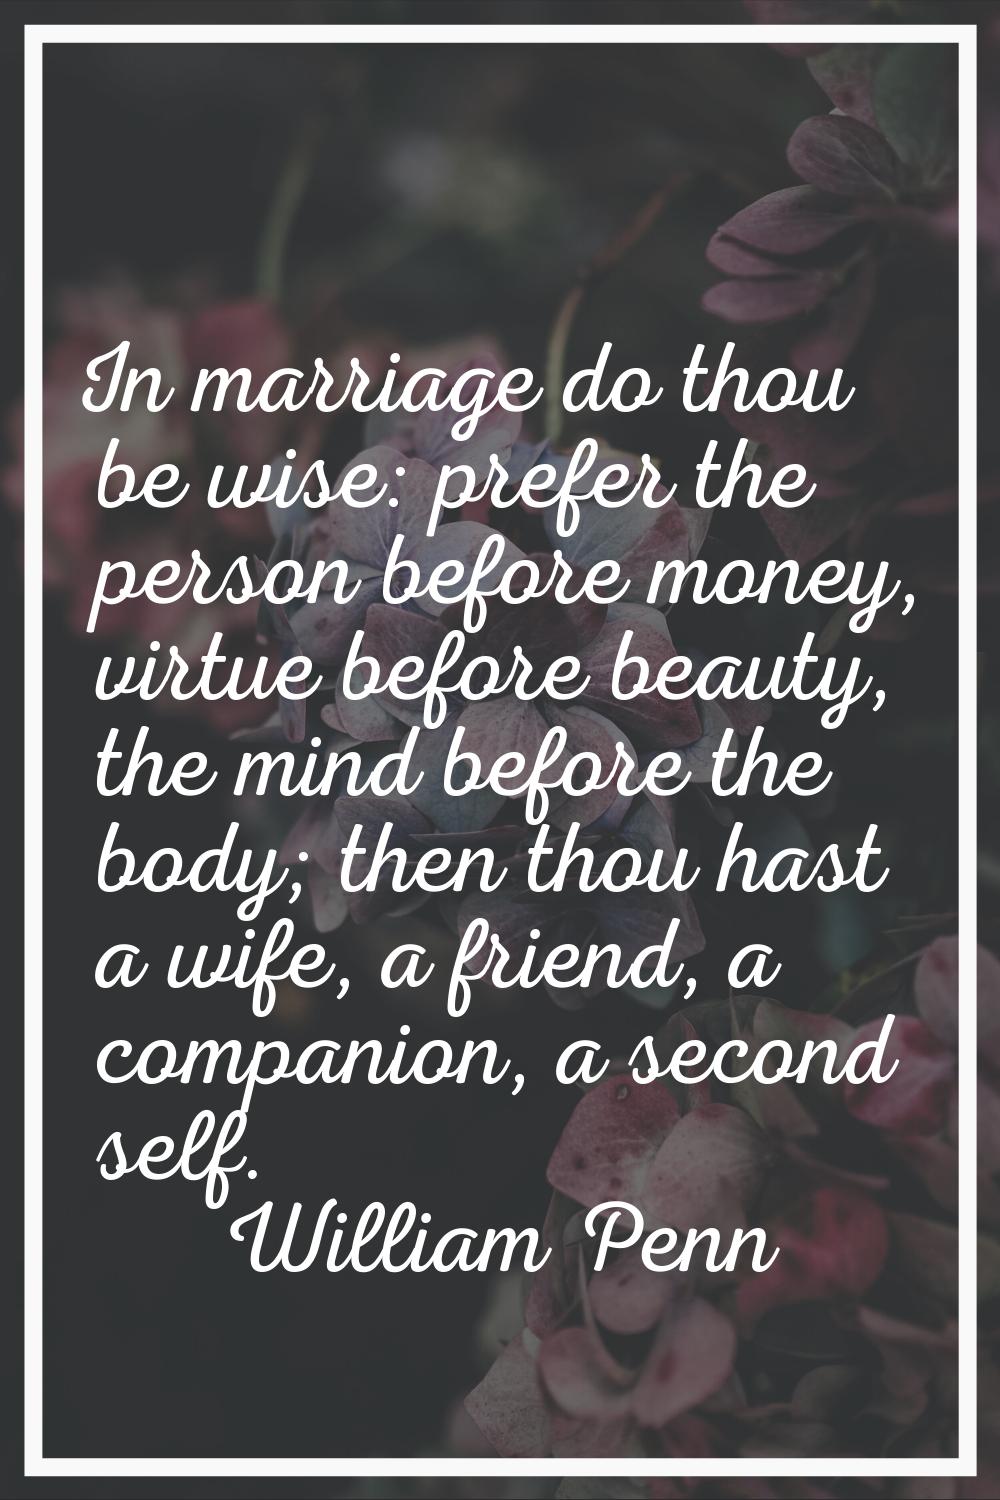 In marriage do thou be wise: prefer the person before money, virtue before beauty, the mind before 